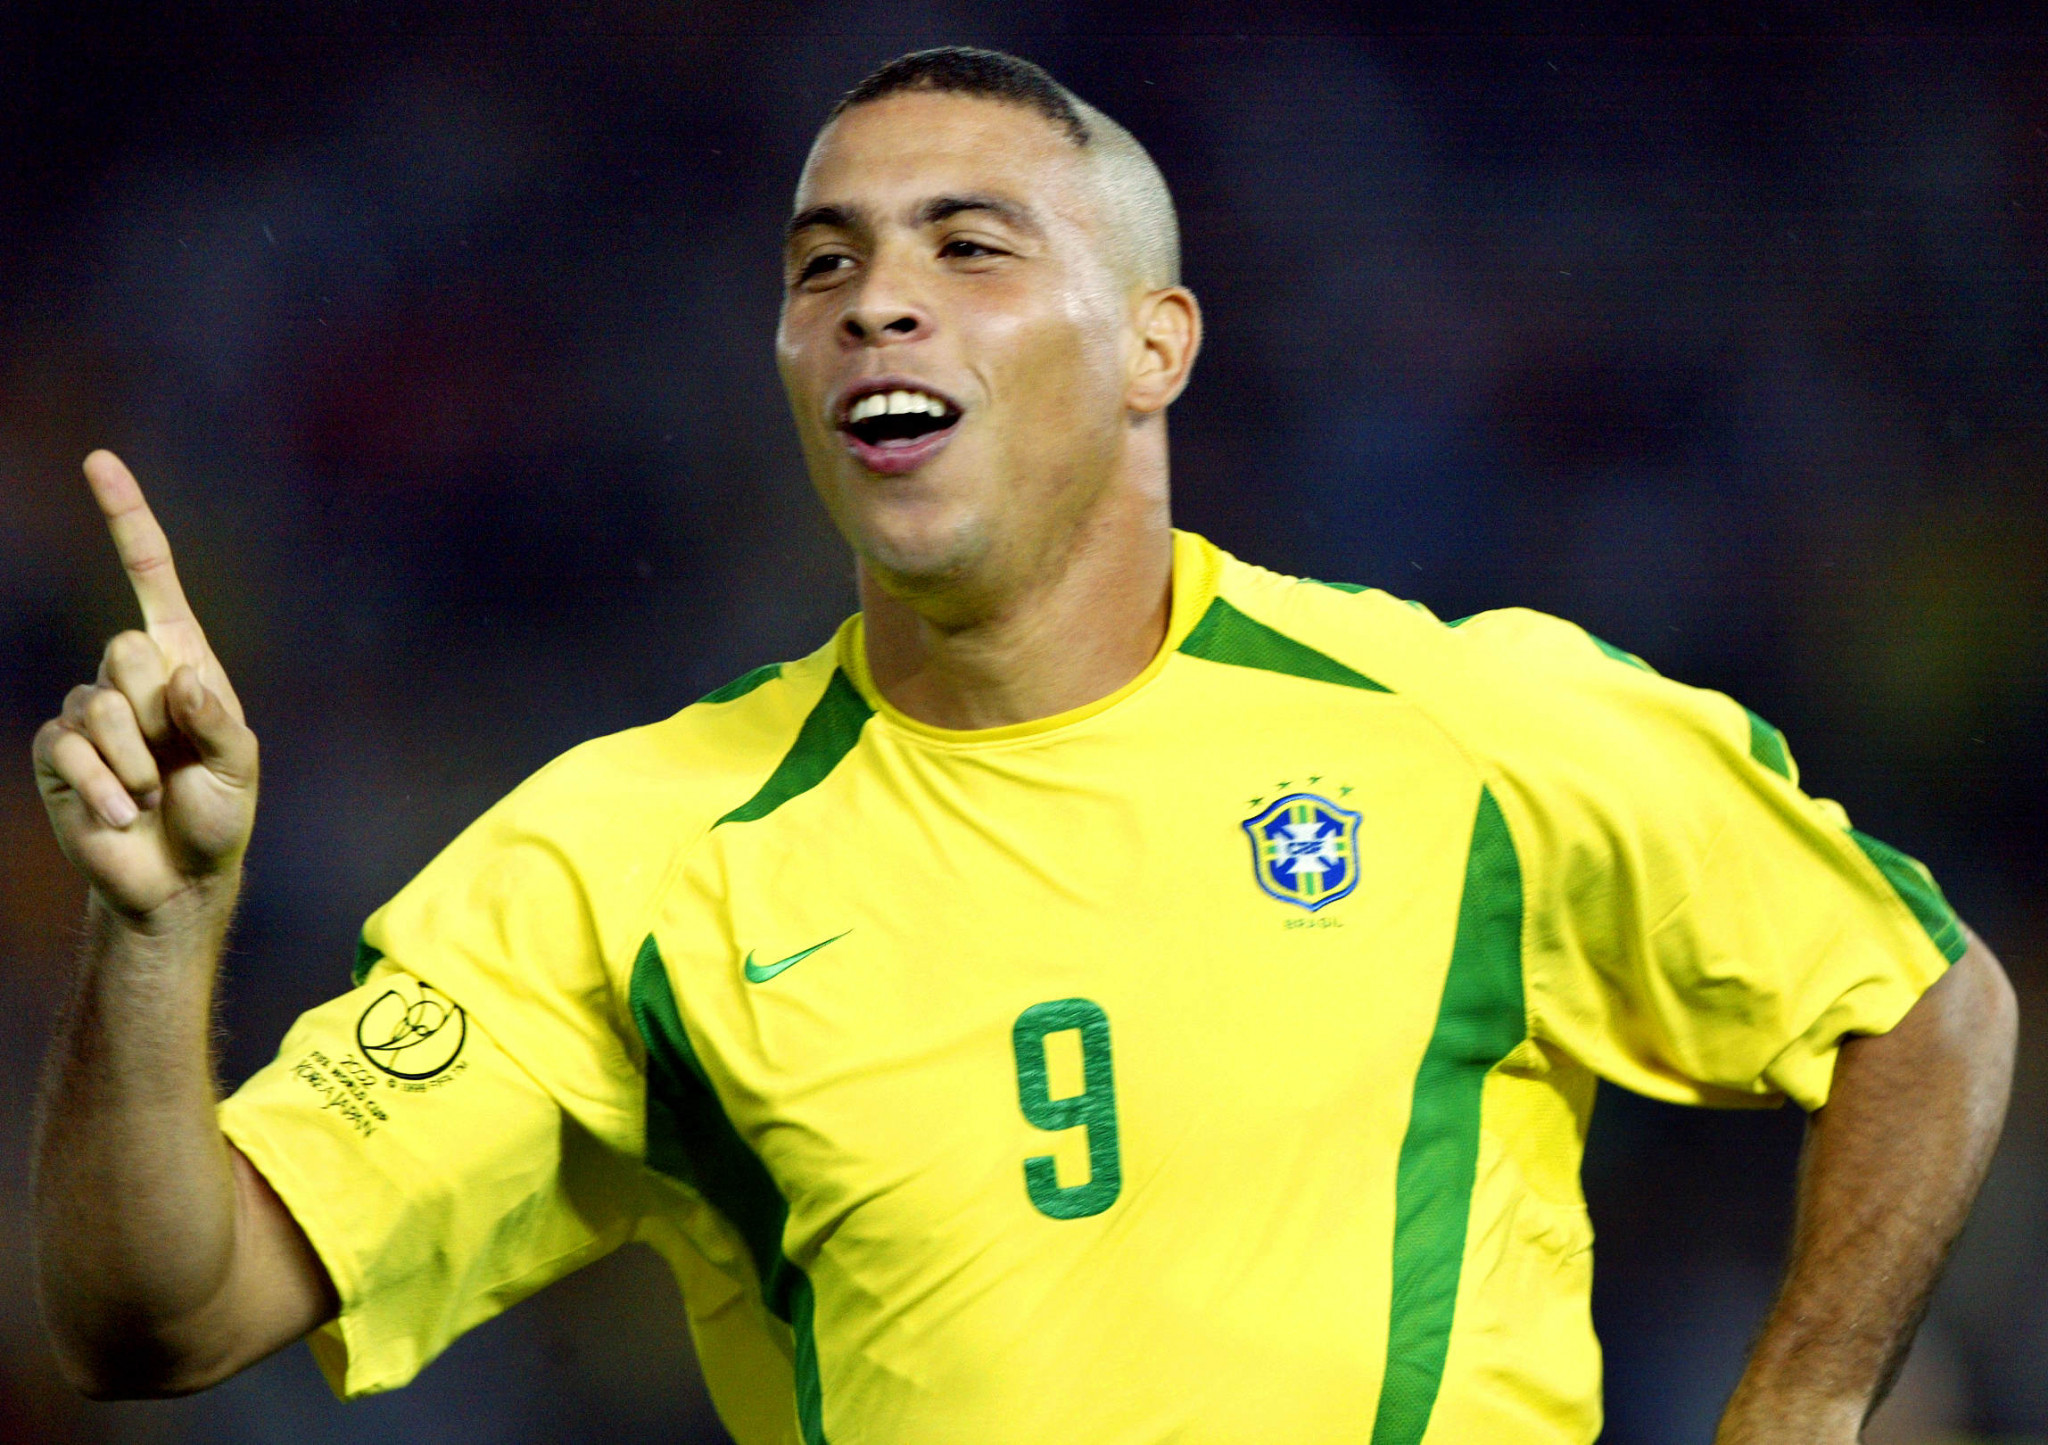 Ronaldo, a World Cup winner in 1994 and 2002, will also feature in the Opening Ceremony ©Getty Images